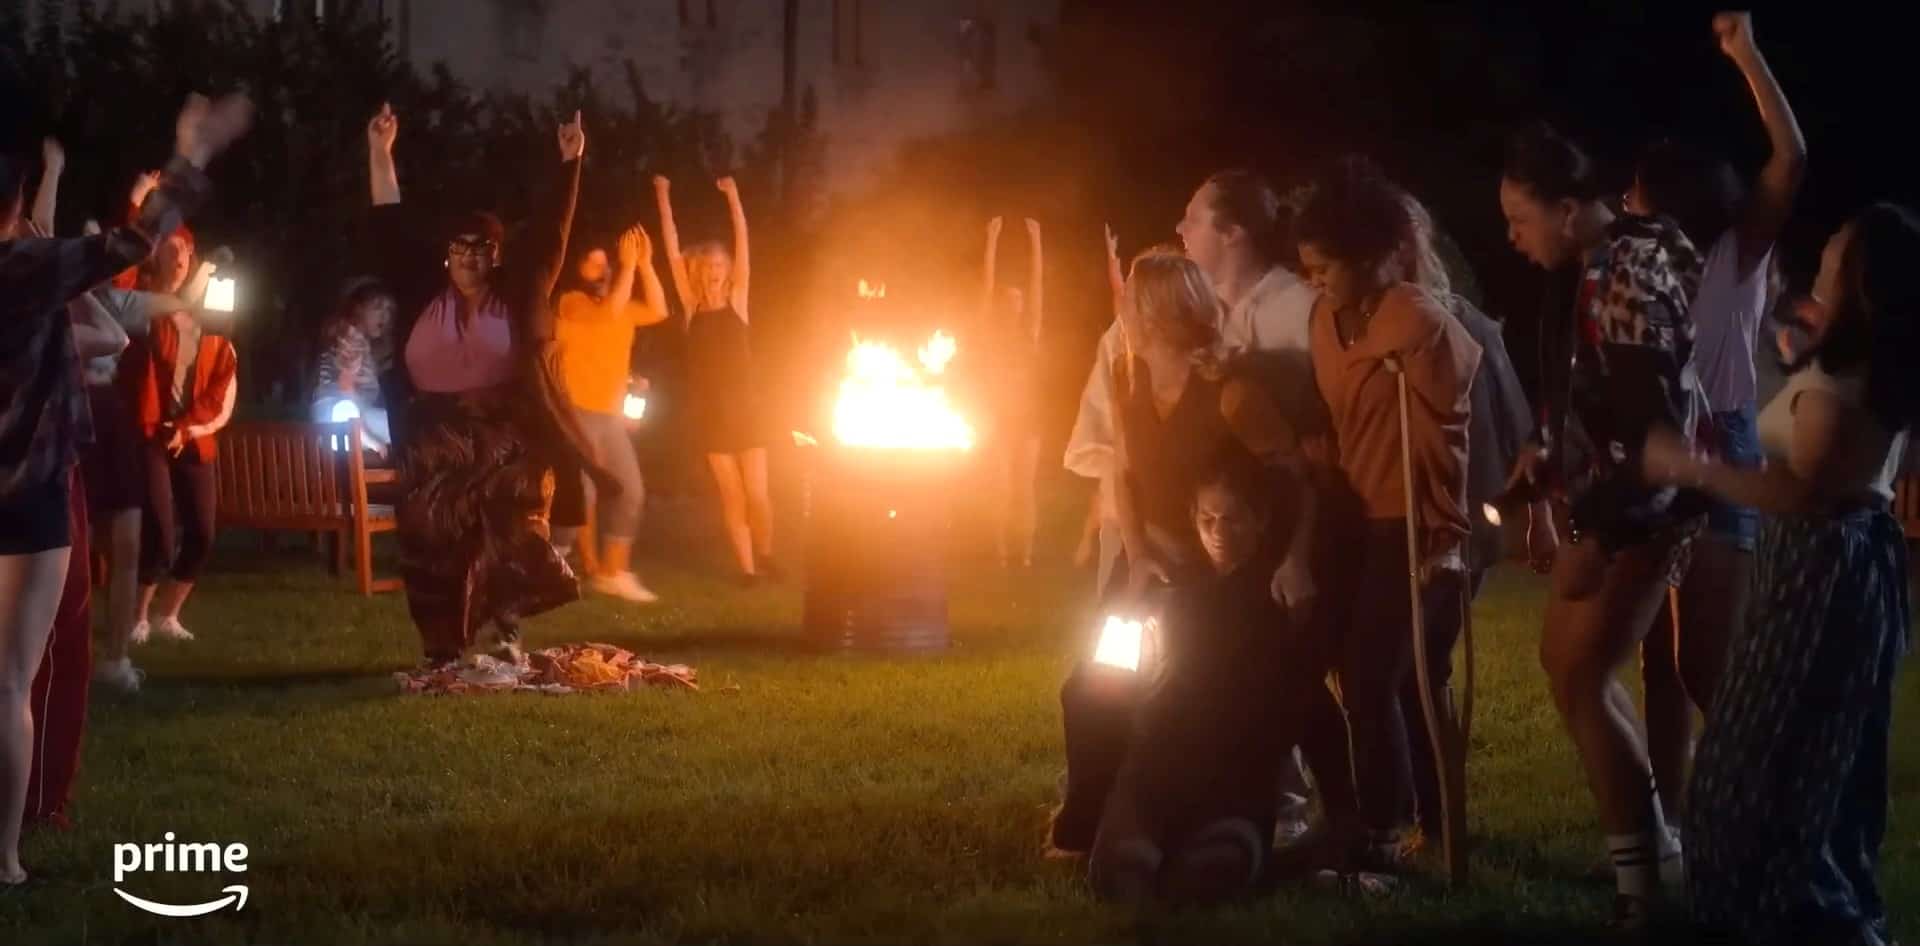 Women gather around a fire in this image from Amazon Prime Video